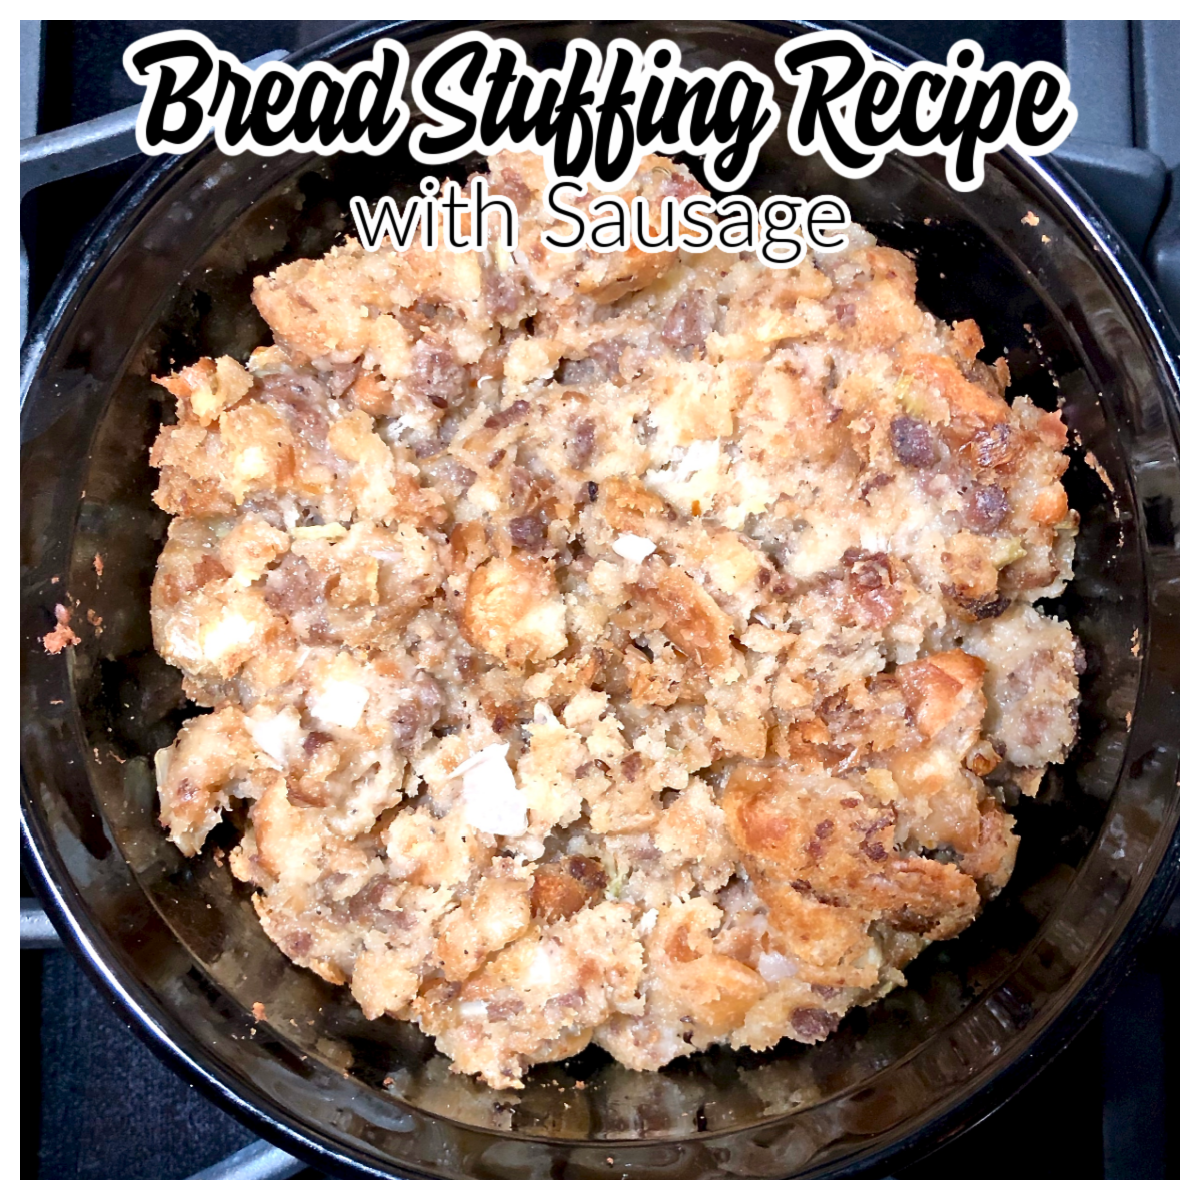 Bread Stuffing Recipe with Sausage Facebook Post